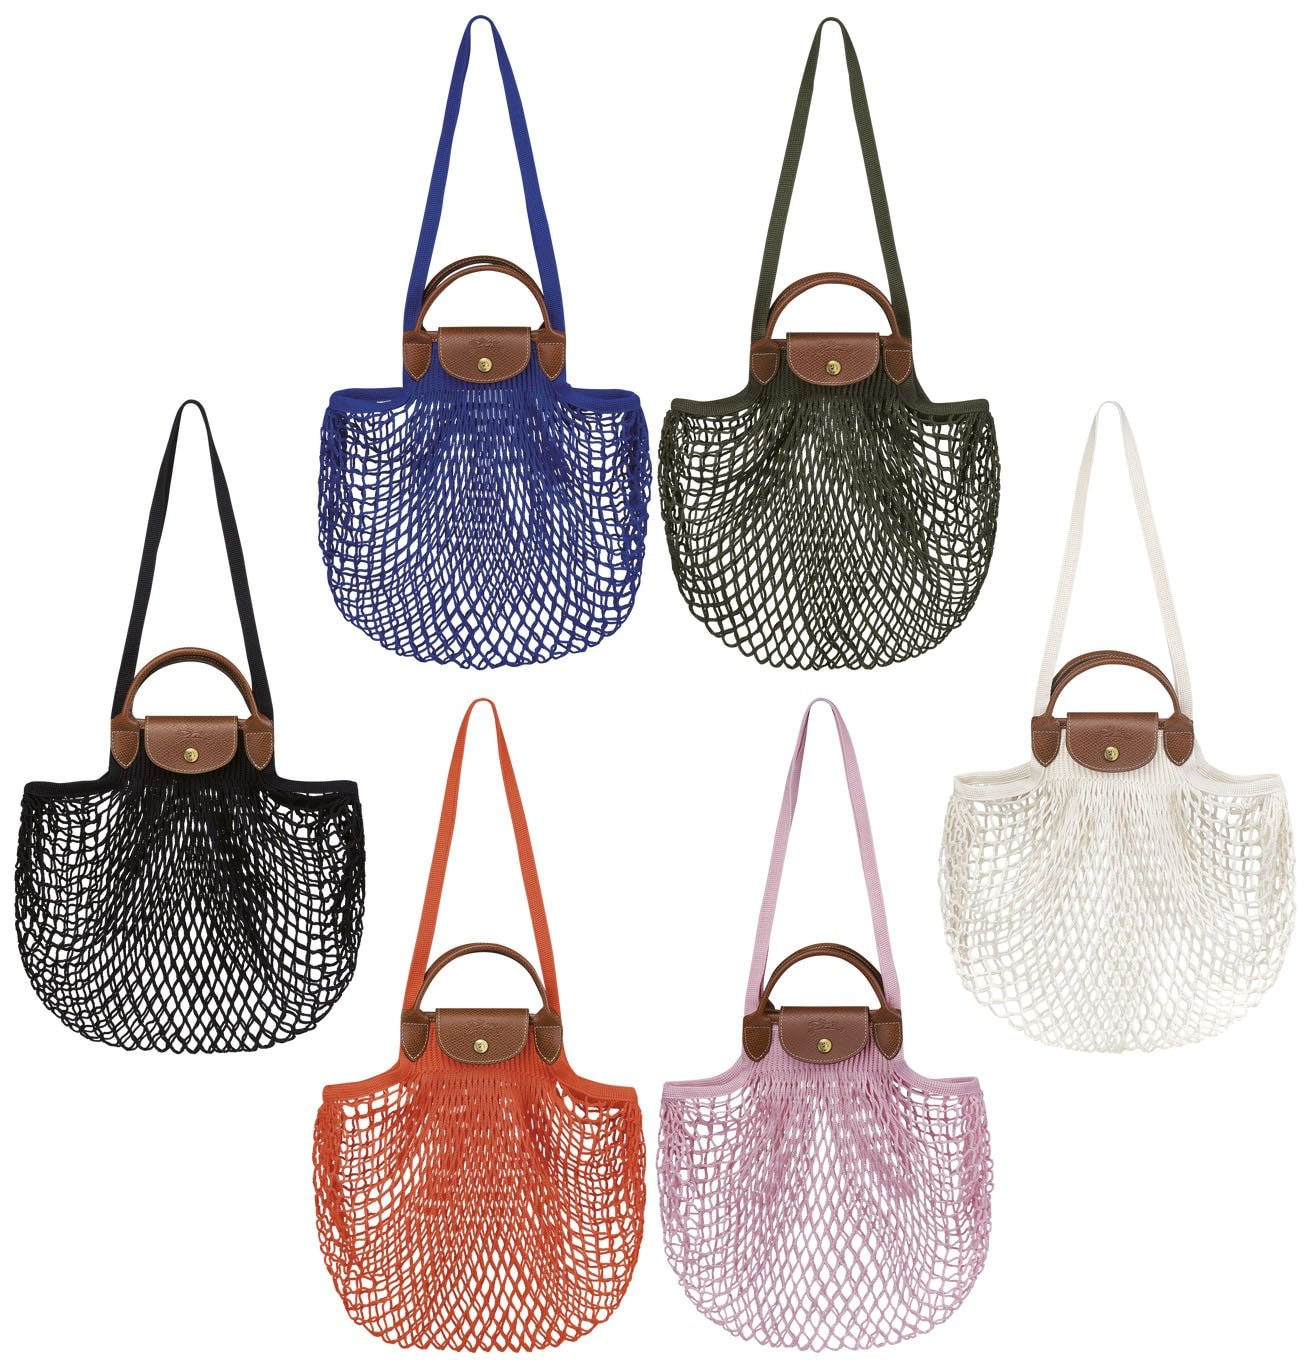 The Filet is a net shopping bag that features the Le Pliage leather handles